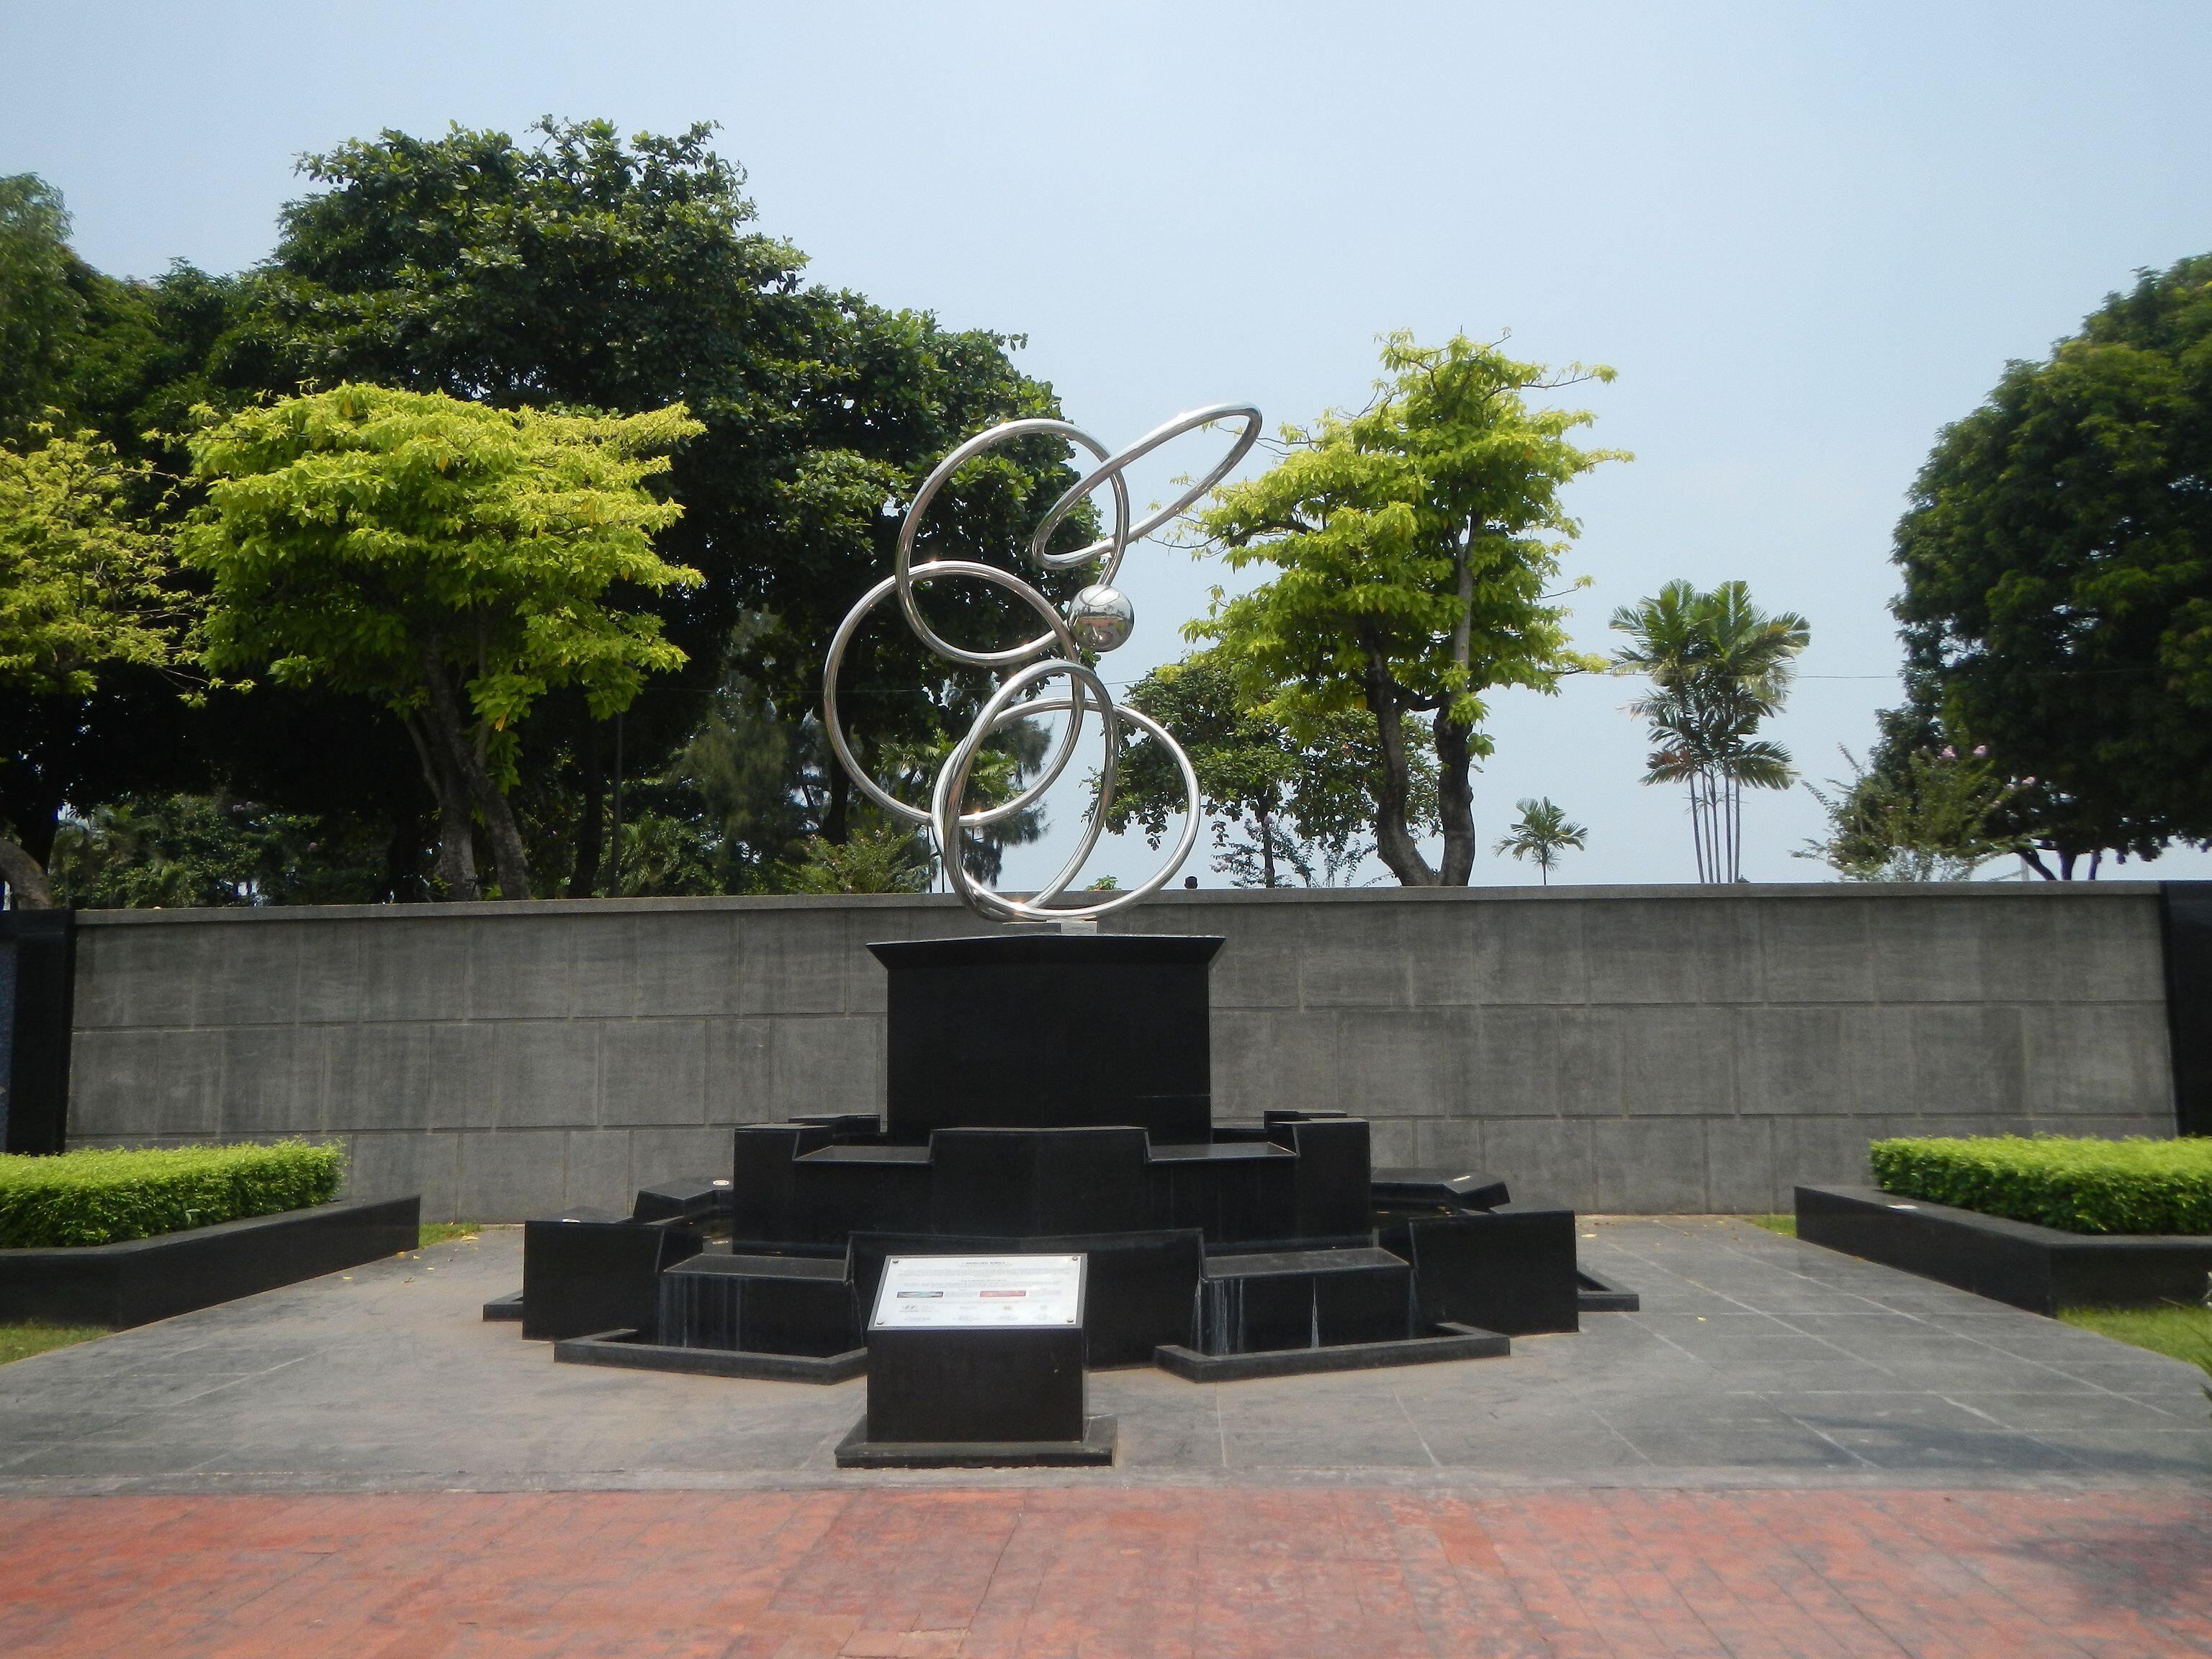 Dancing Rings, "Ang Pagbabago: Peace-Love" (Jose F. Datuin, Rizal Park, Manila) Artworks in the Park (Replica of the same sculpture that won 1st…